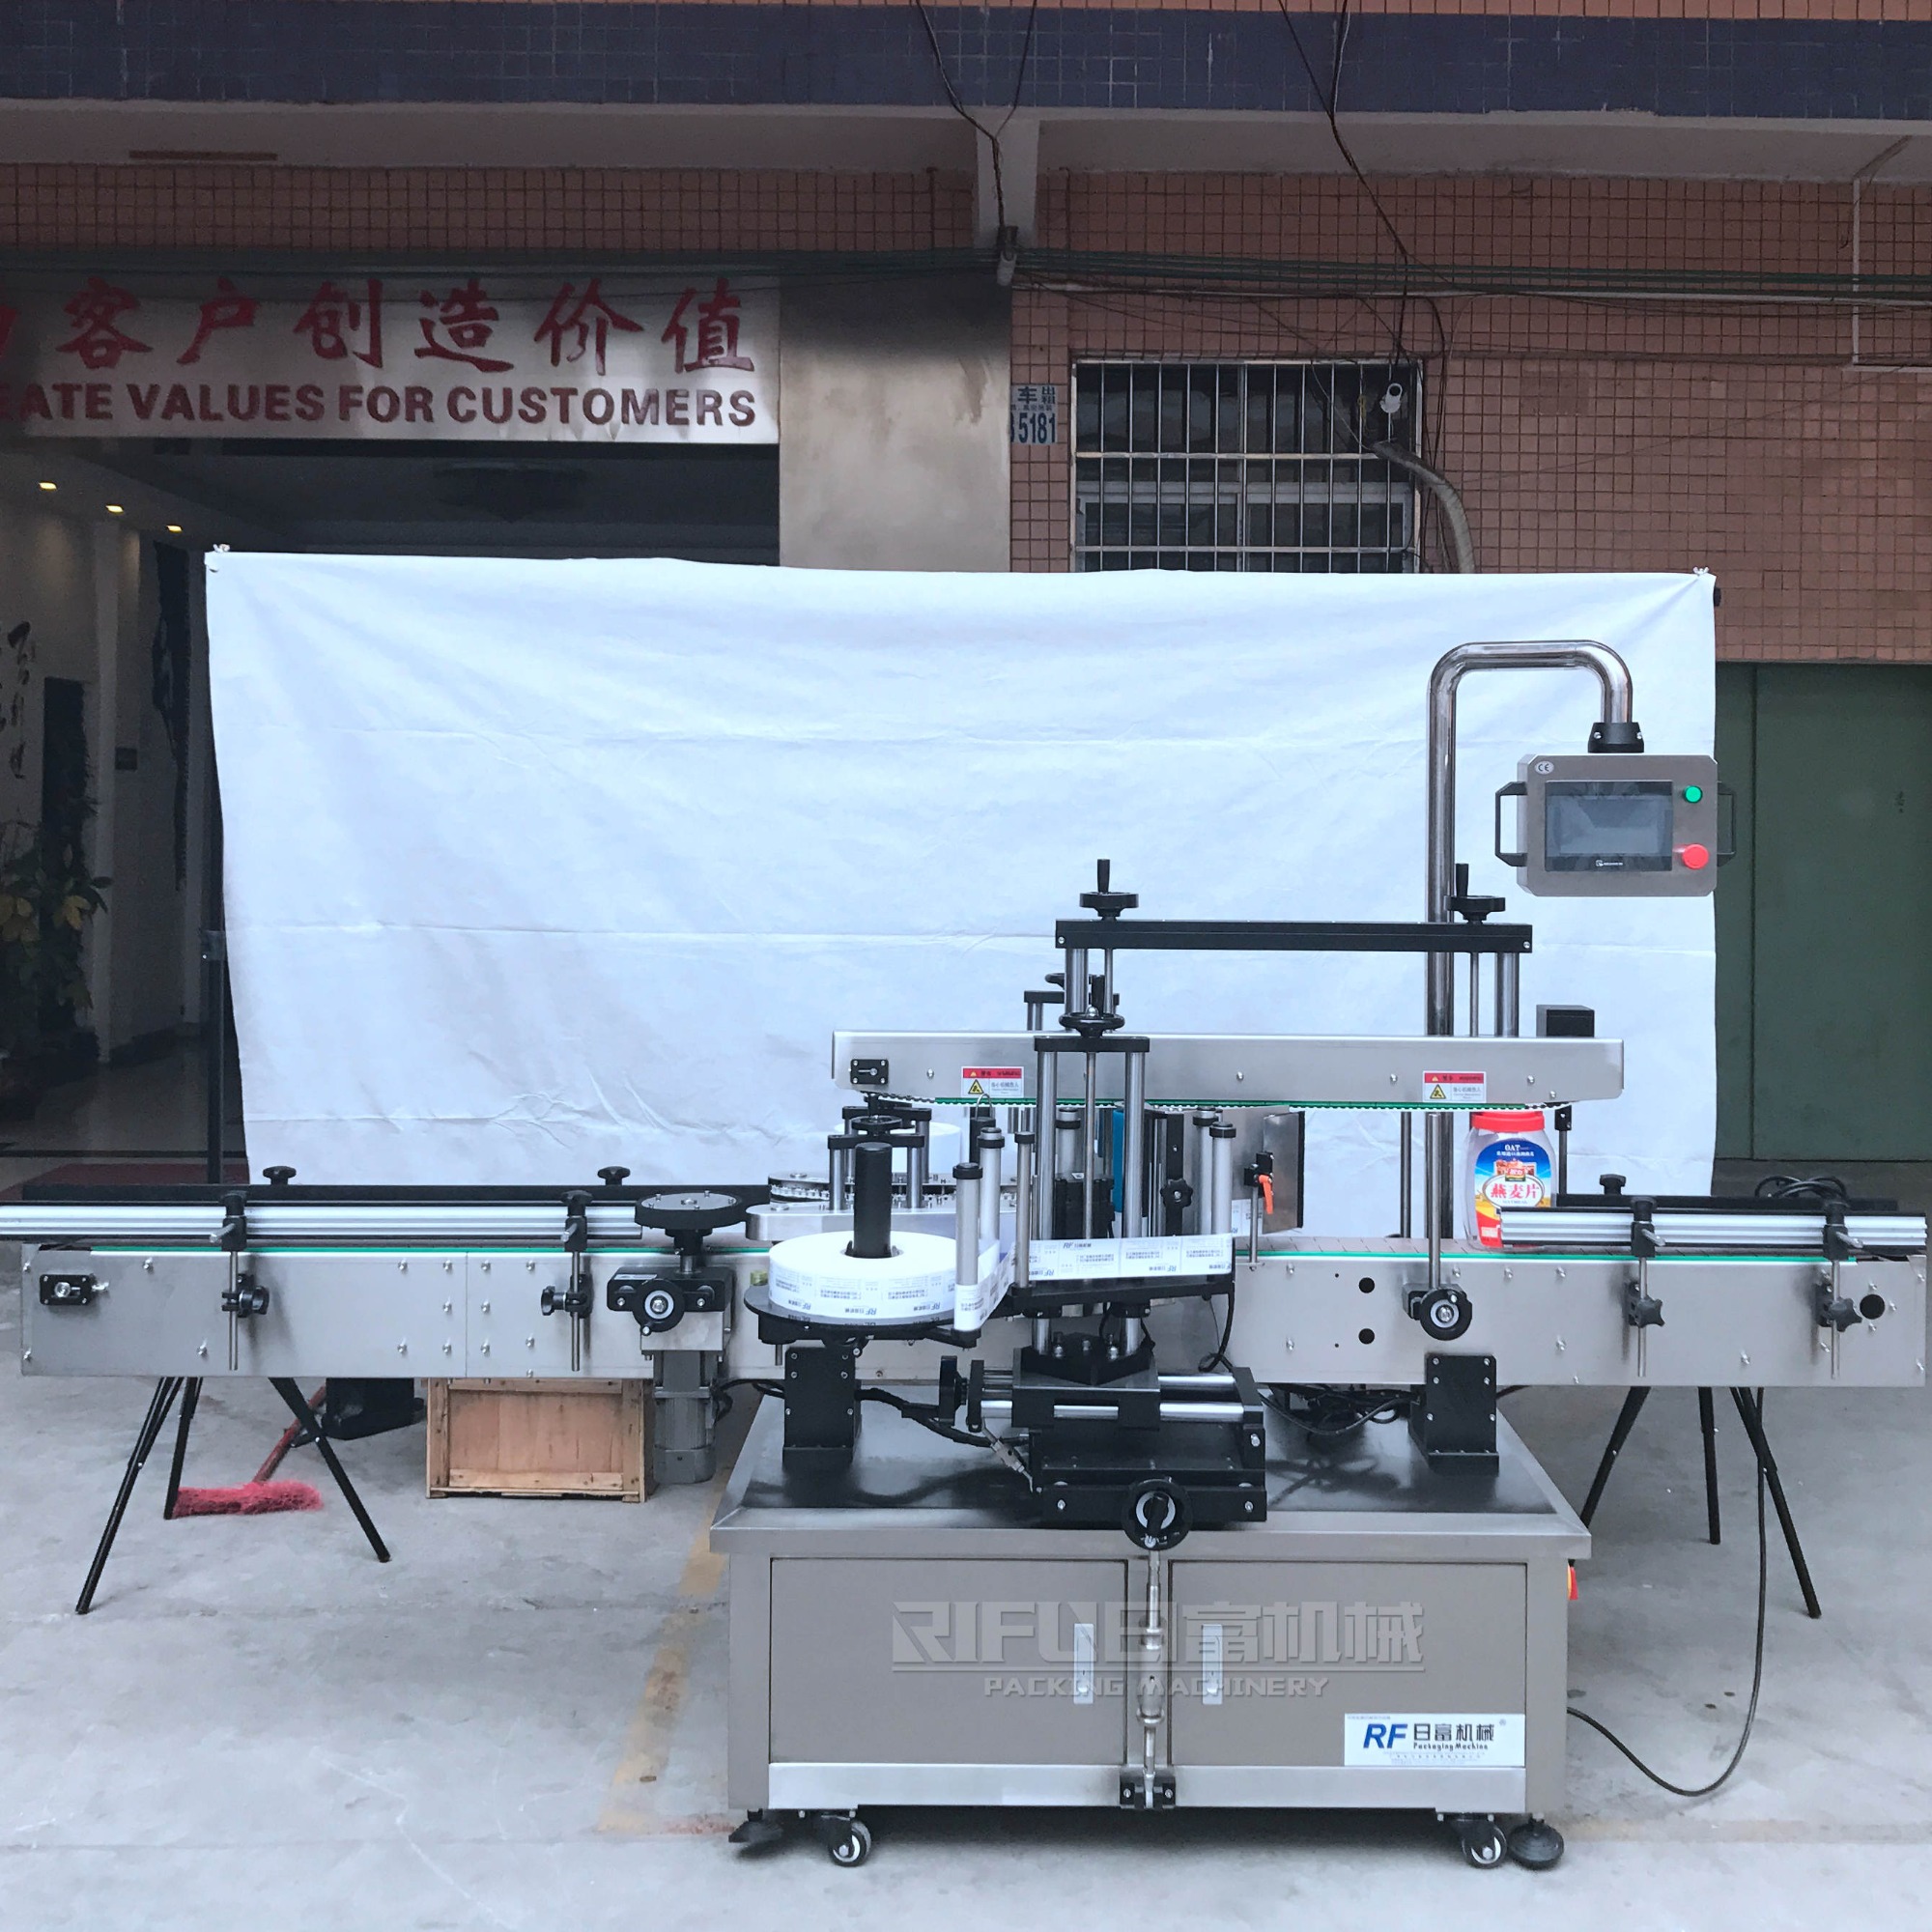 Fully Automatic Double Sides Sticker Labeling Machine for Flat/Oval/Rectangular/Square bottles